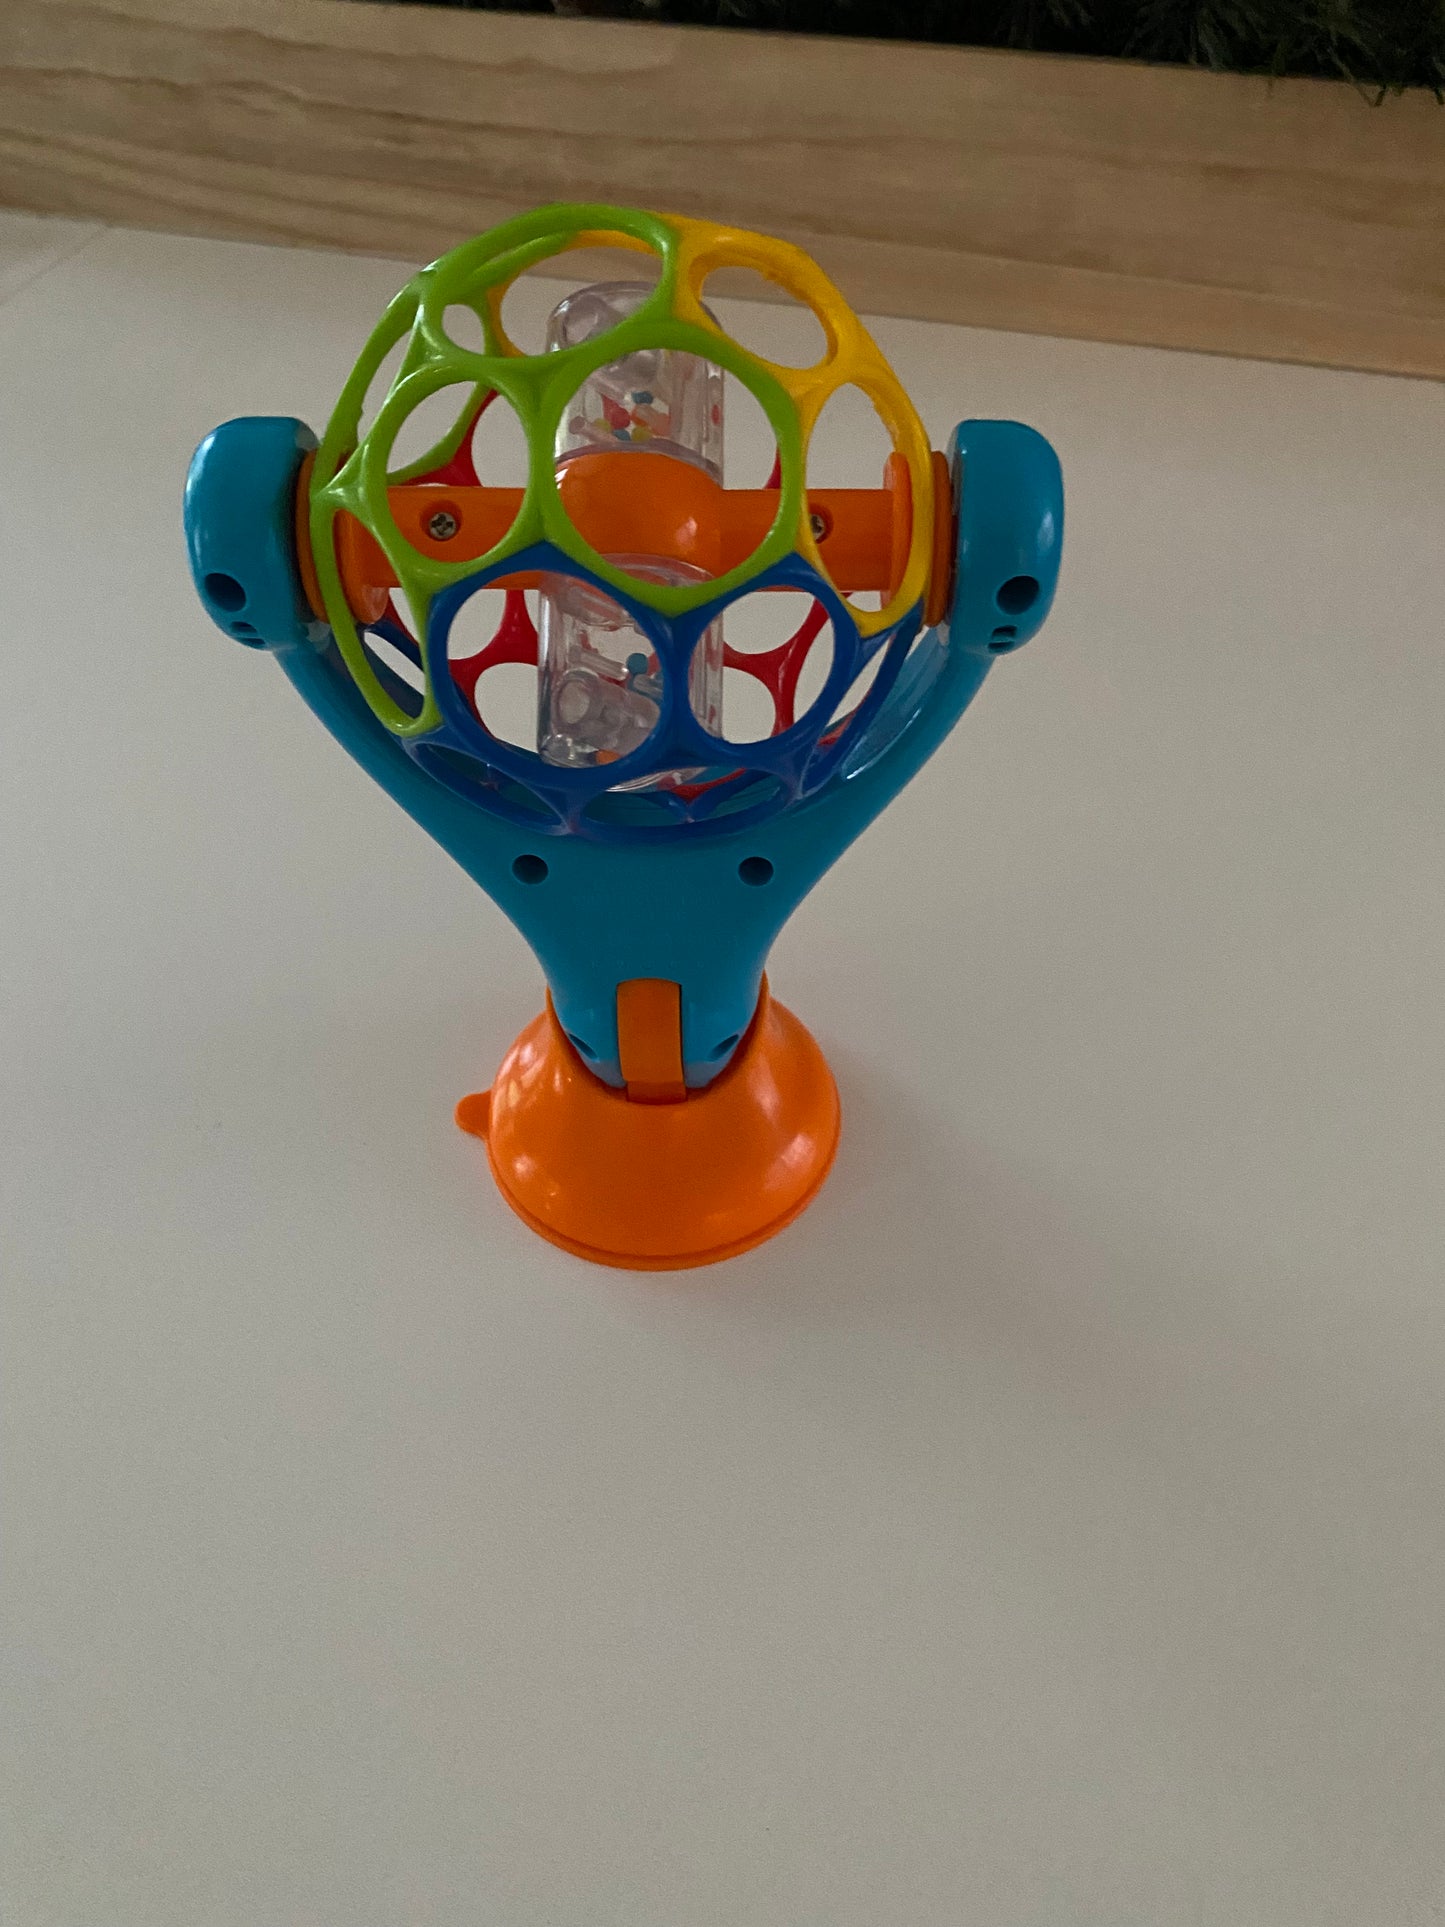 O Ball Grip and Play Suction Toy